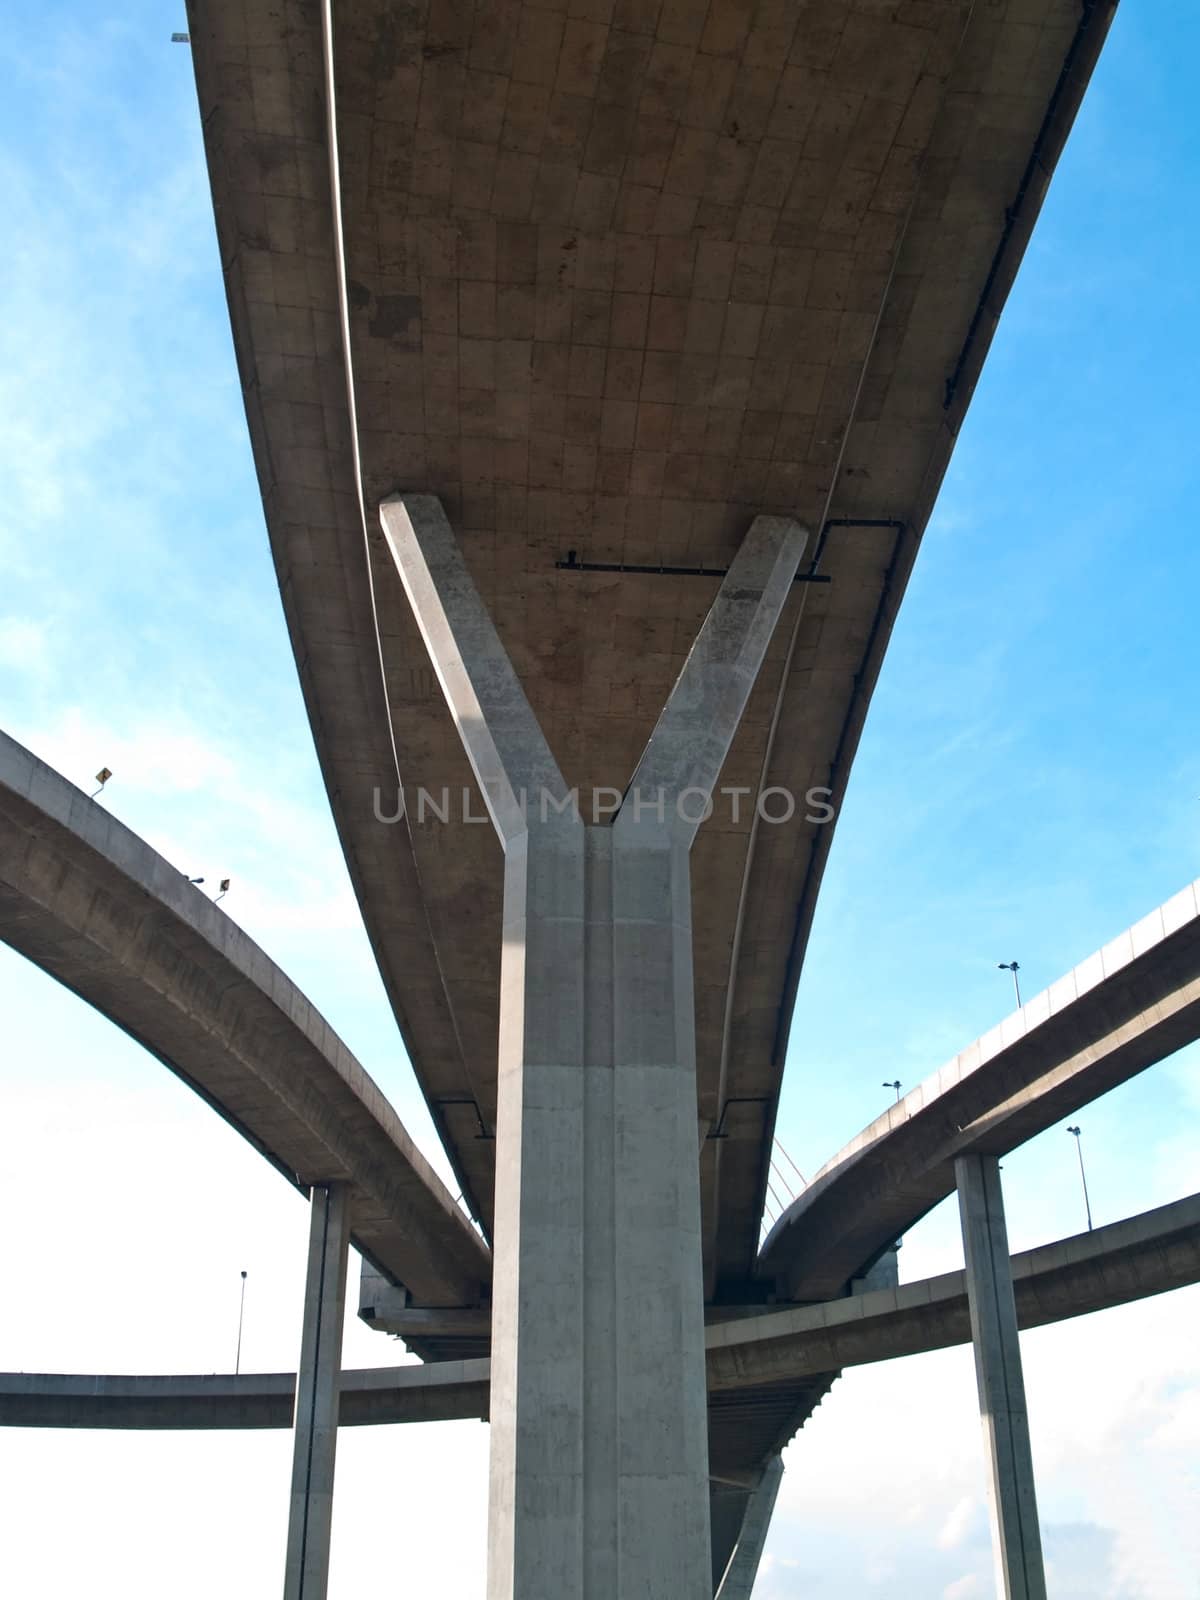 Intersection expressway with grade separation on blue sky